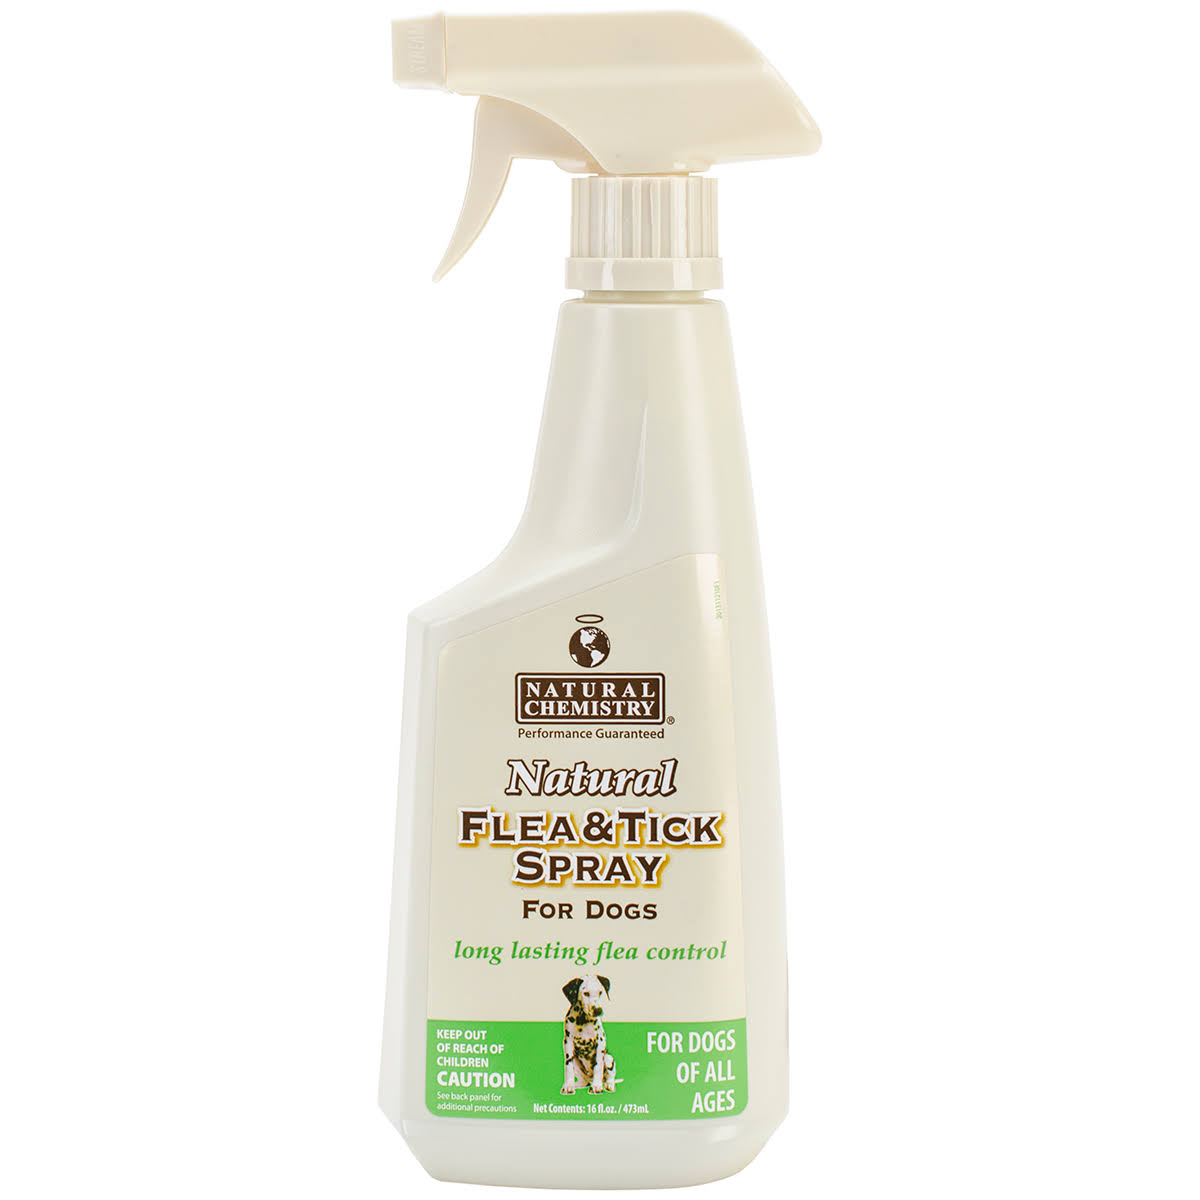 Natural Chemistry Natural Flea and Tick Spray for Dogs - 16oz